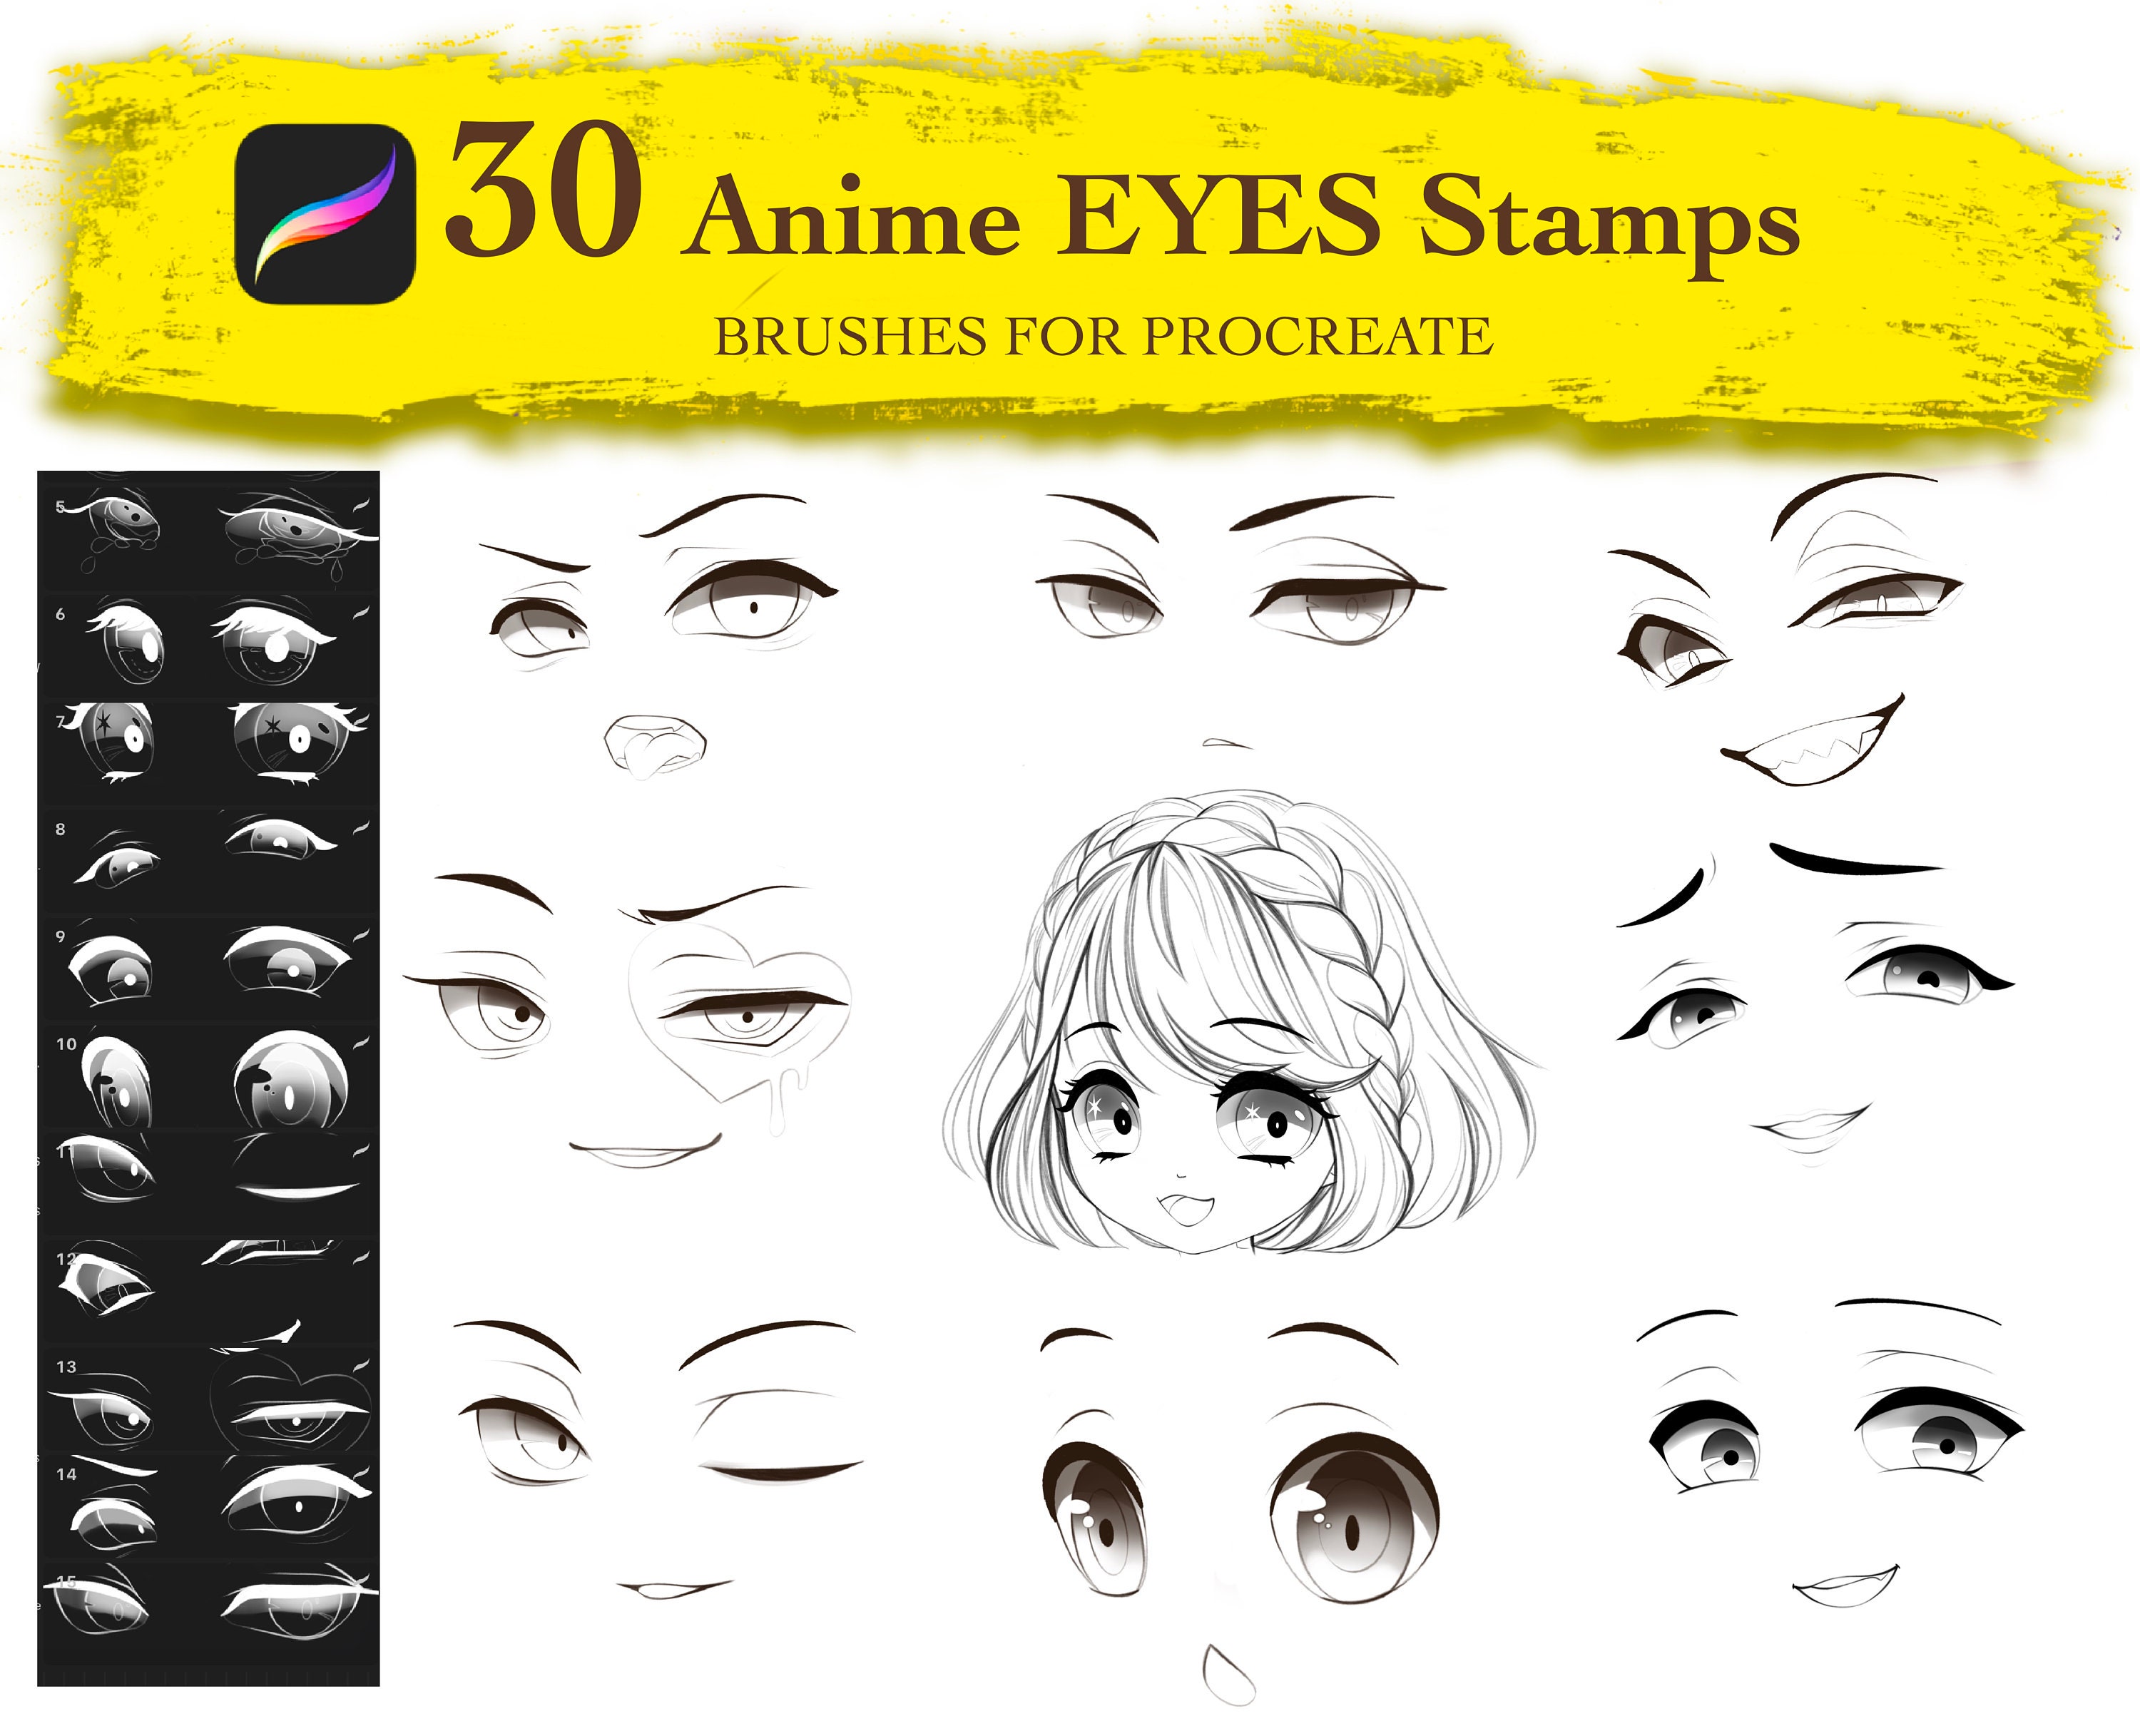 Made By Me Anime Color & Design Artist Set, 22-Piece Art Set, How to Draw  Anime, Create Your Own Comics, Make Your Own Manga & Anime Sketchbook,  Gifts for Anime Enthusiasts, Arts & Crafts for Kids 6+ : Everything Else 